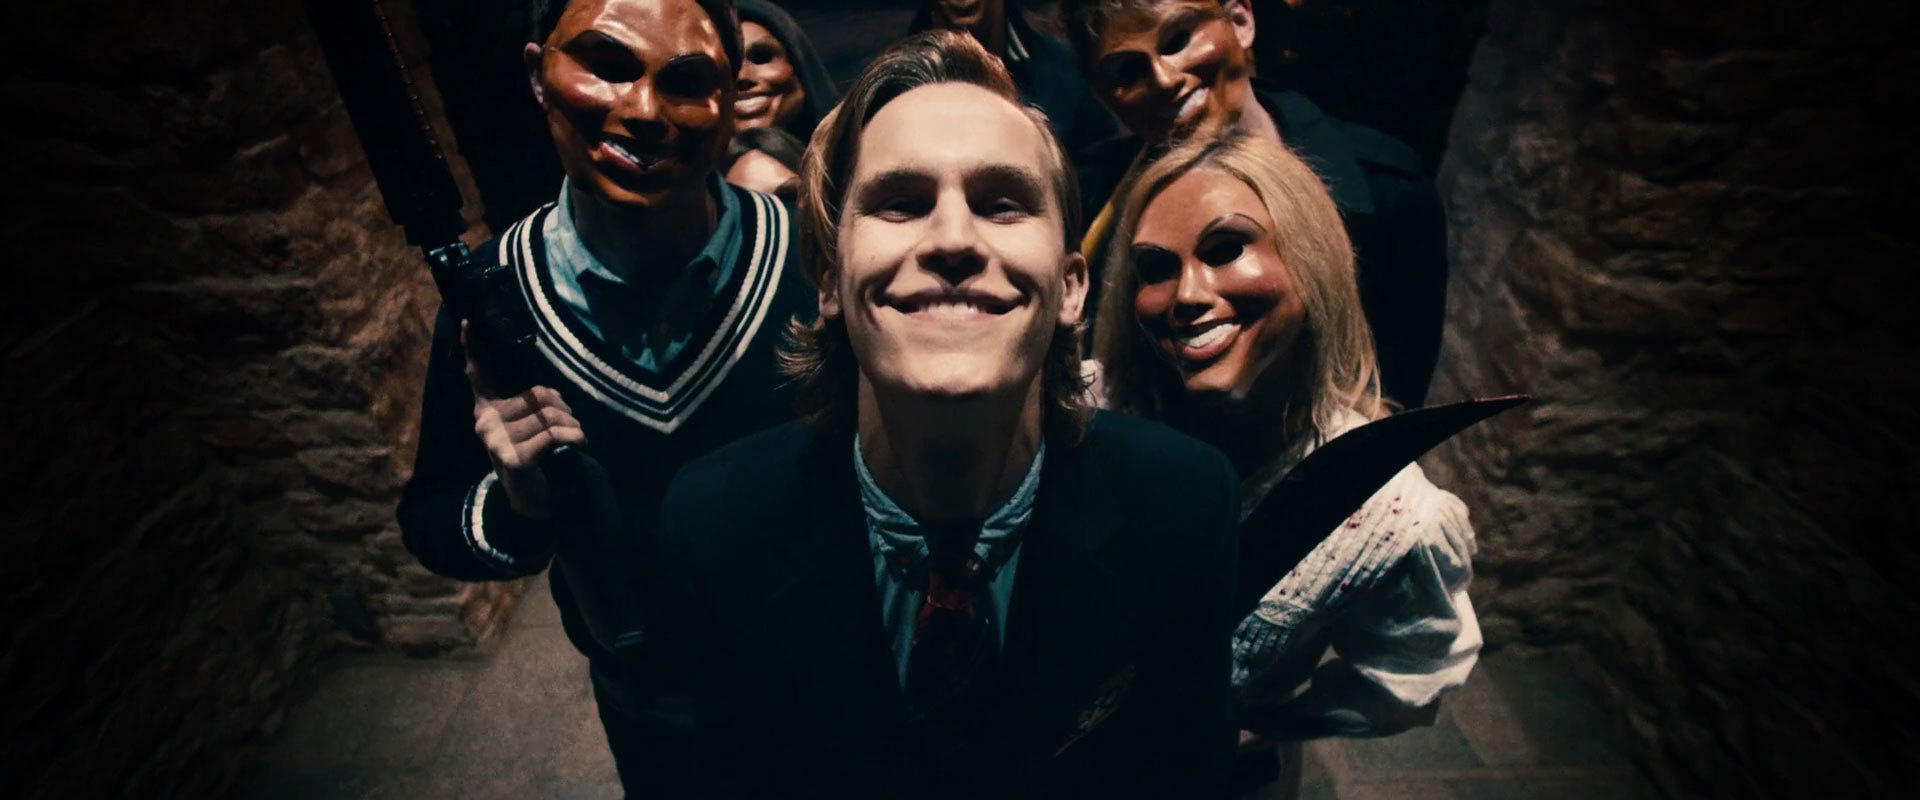 The Purge: Election Year Pics, Movie Collection